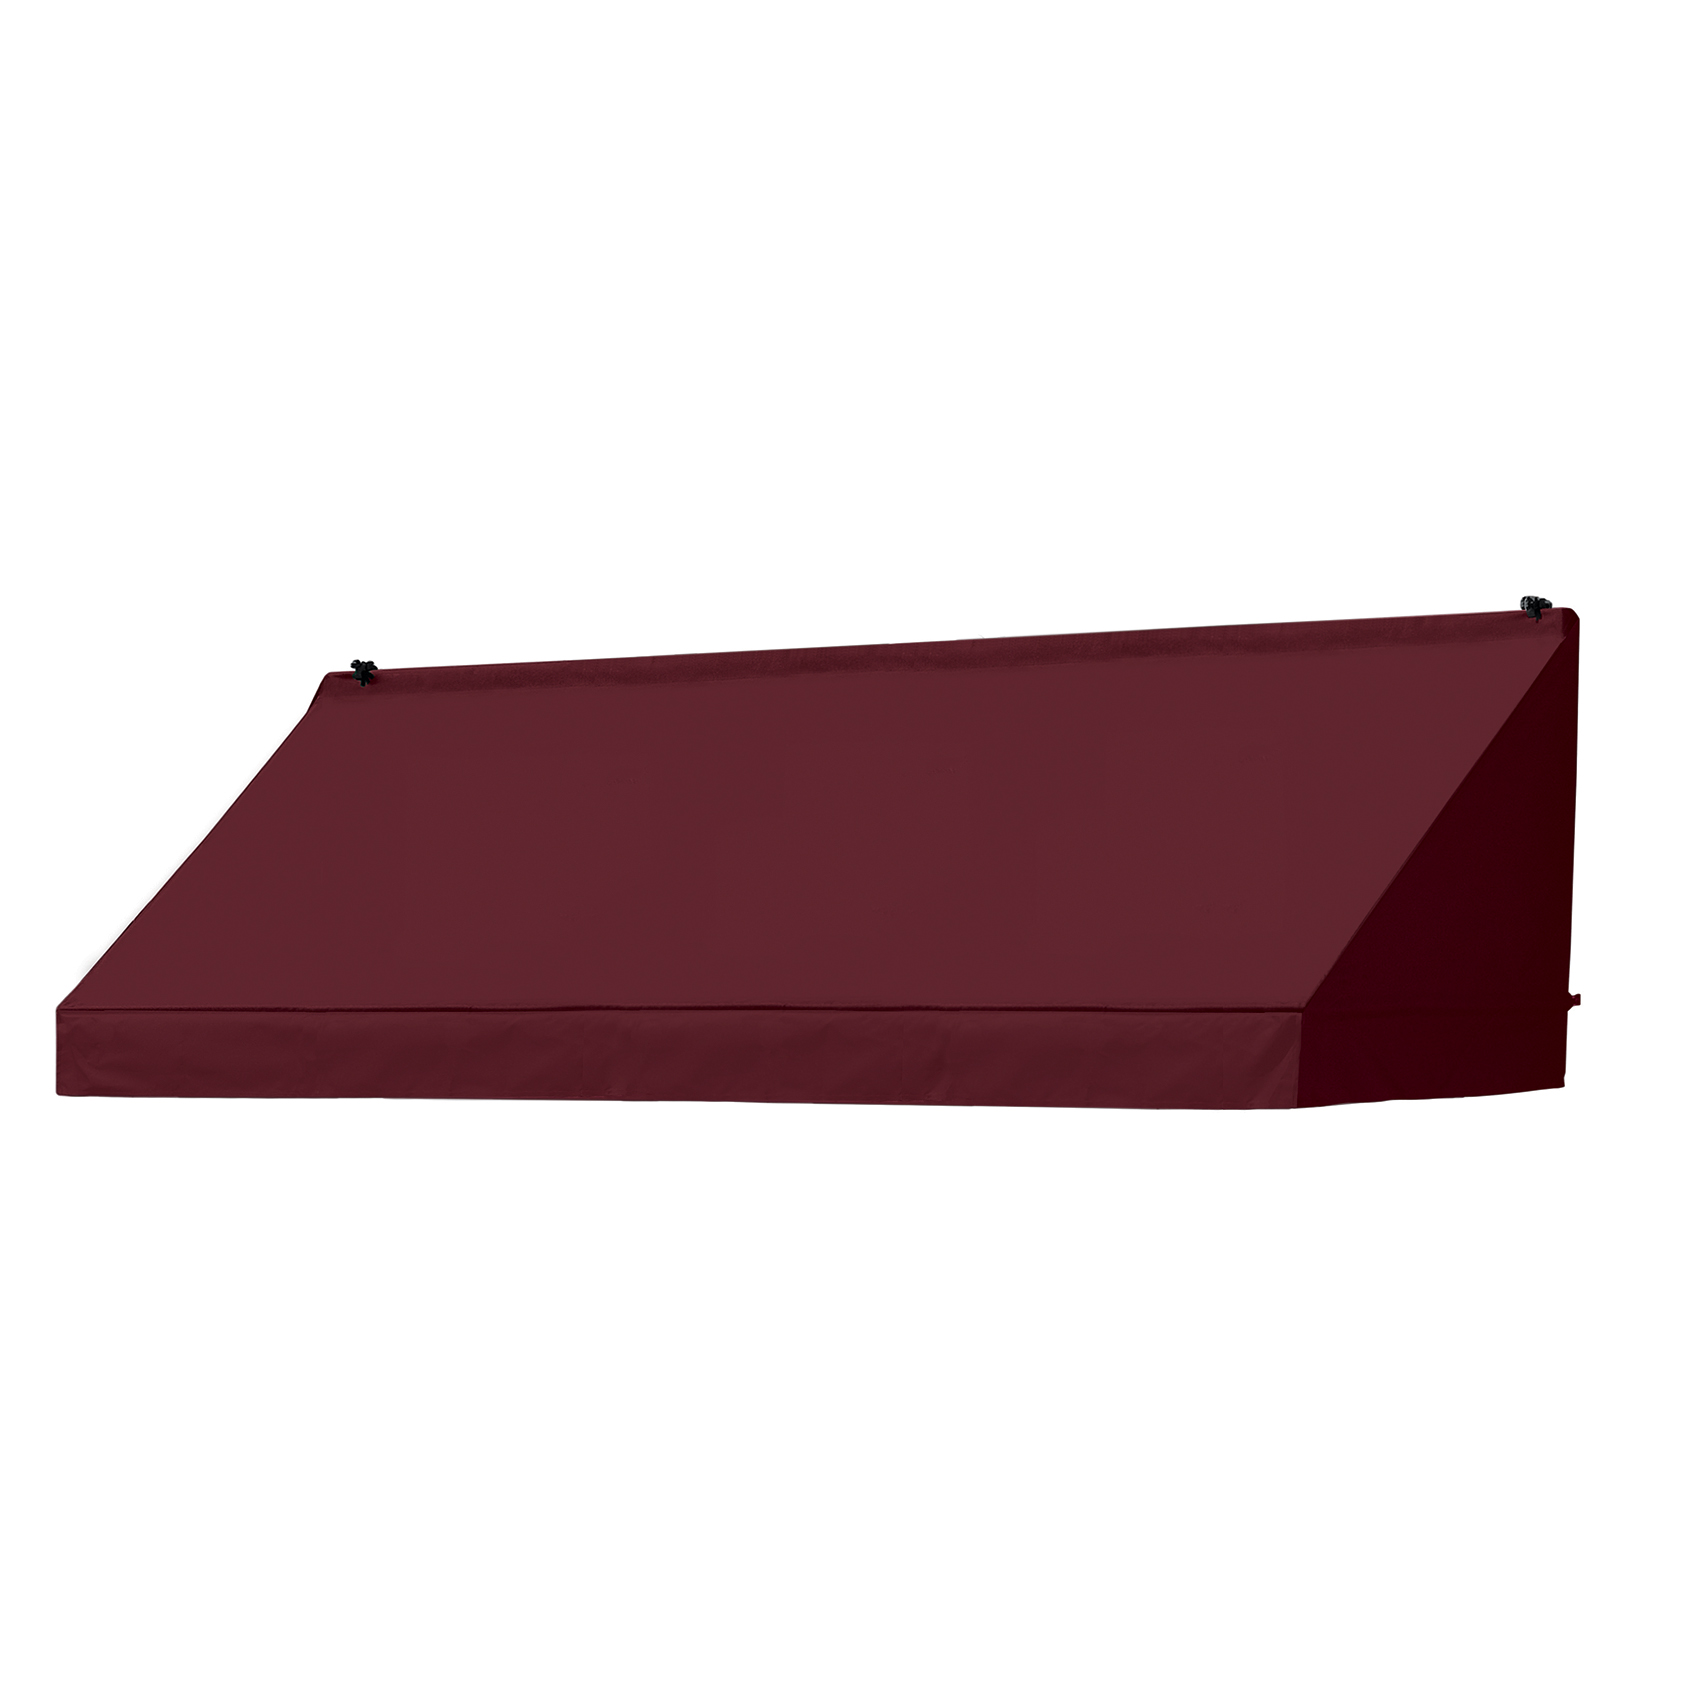 UPC 799870462758 product image for Awnings in a Box® 6' Classic Style Awning in Assorted Colors | upcitemdb.com